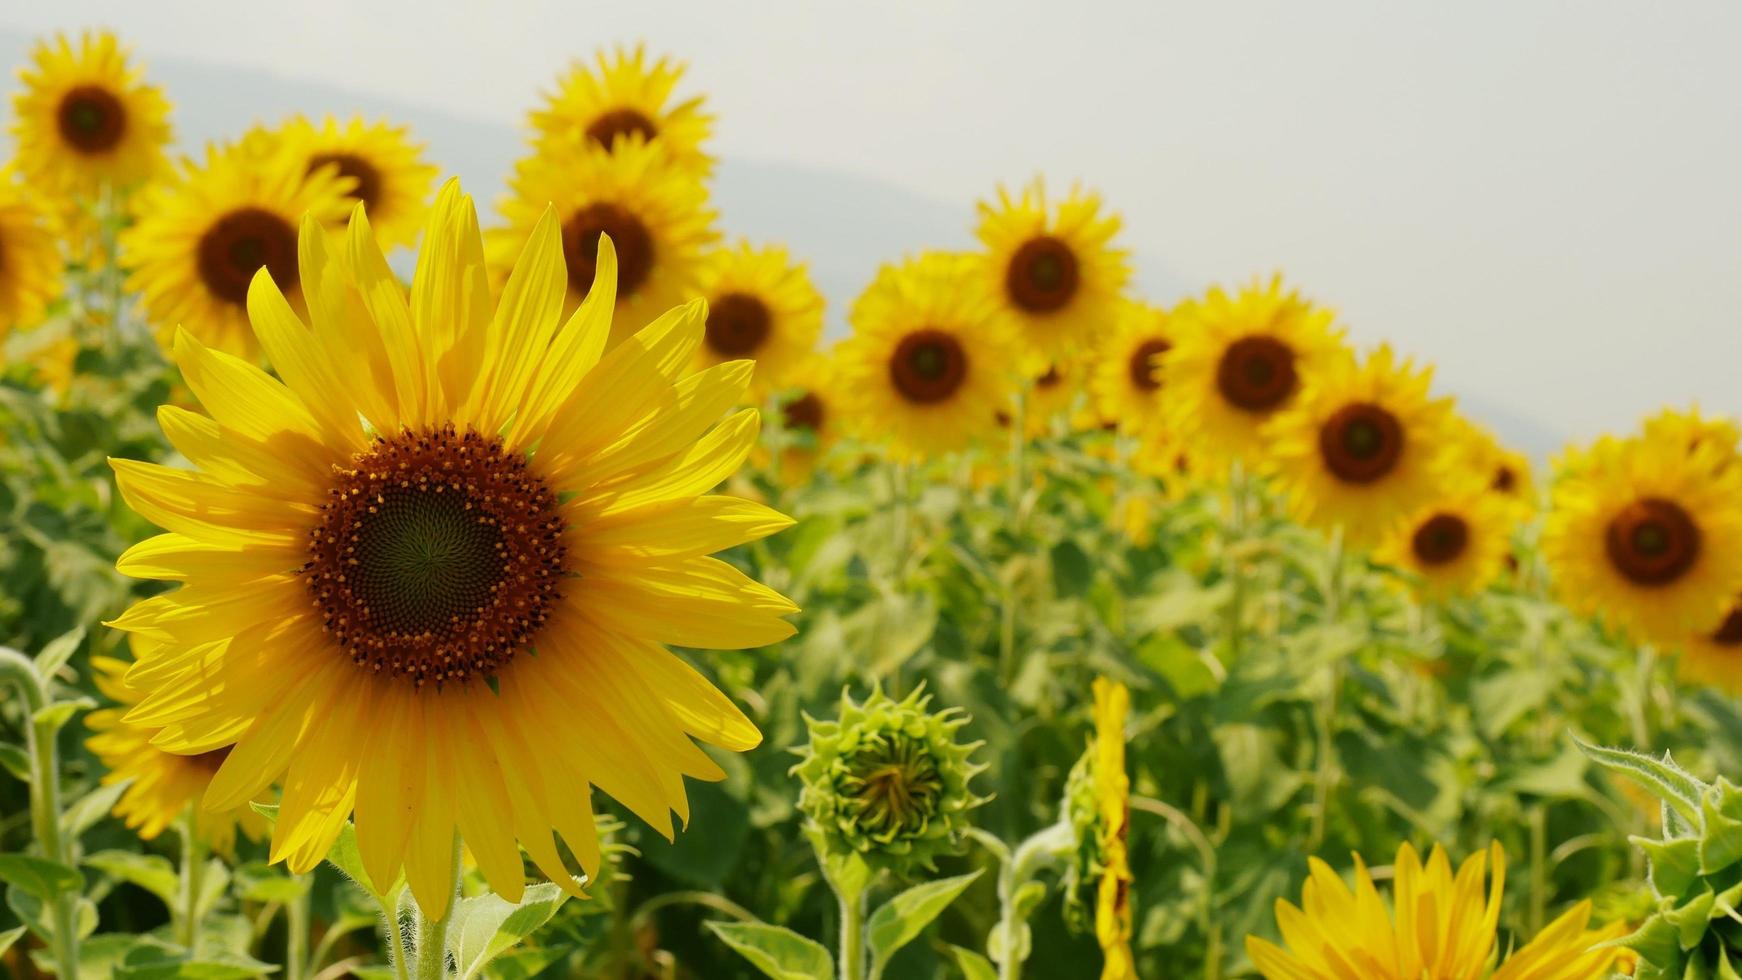 Sunflower fields blooming in the summer countryside. photo